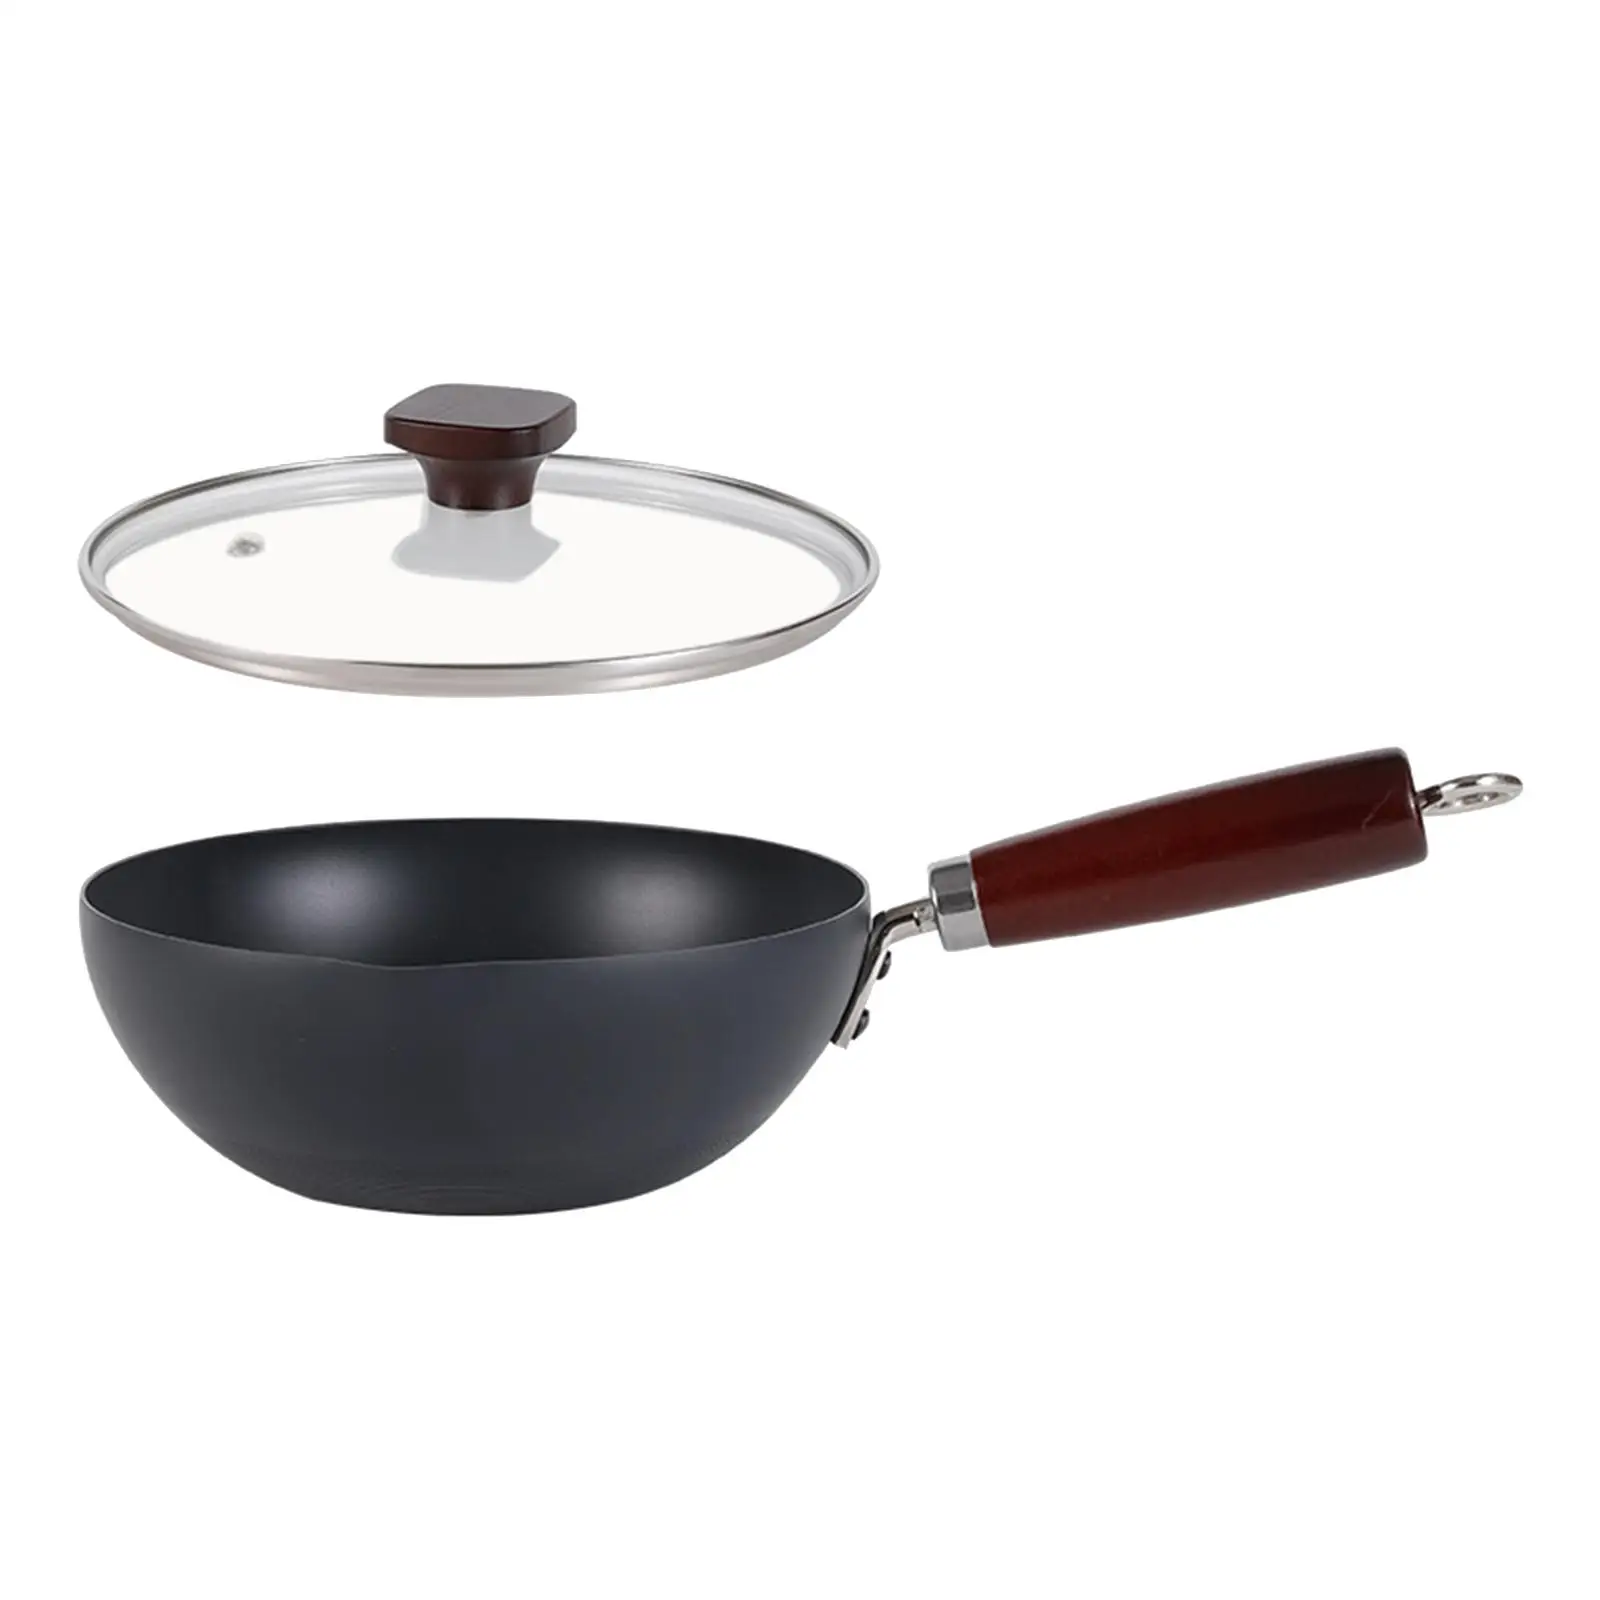 Nonstick Wok with Lid Skillet Omelet Pan Frying Pan Ompatible Cooking Wok with Cover for Induction Cooktop Induction All Stoves